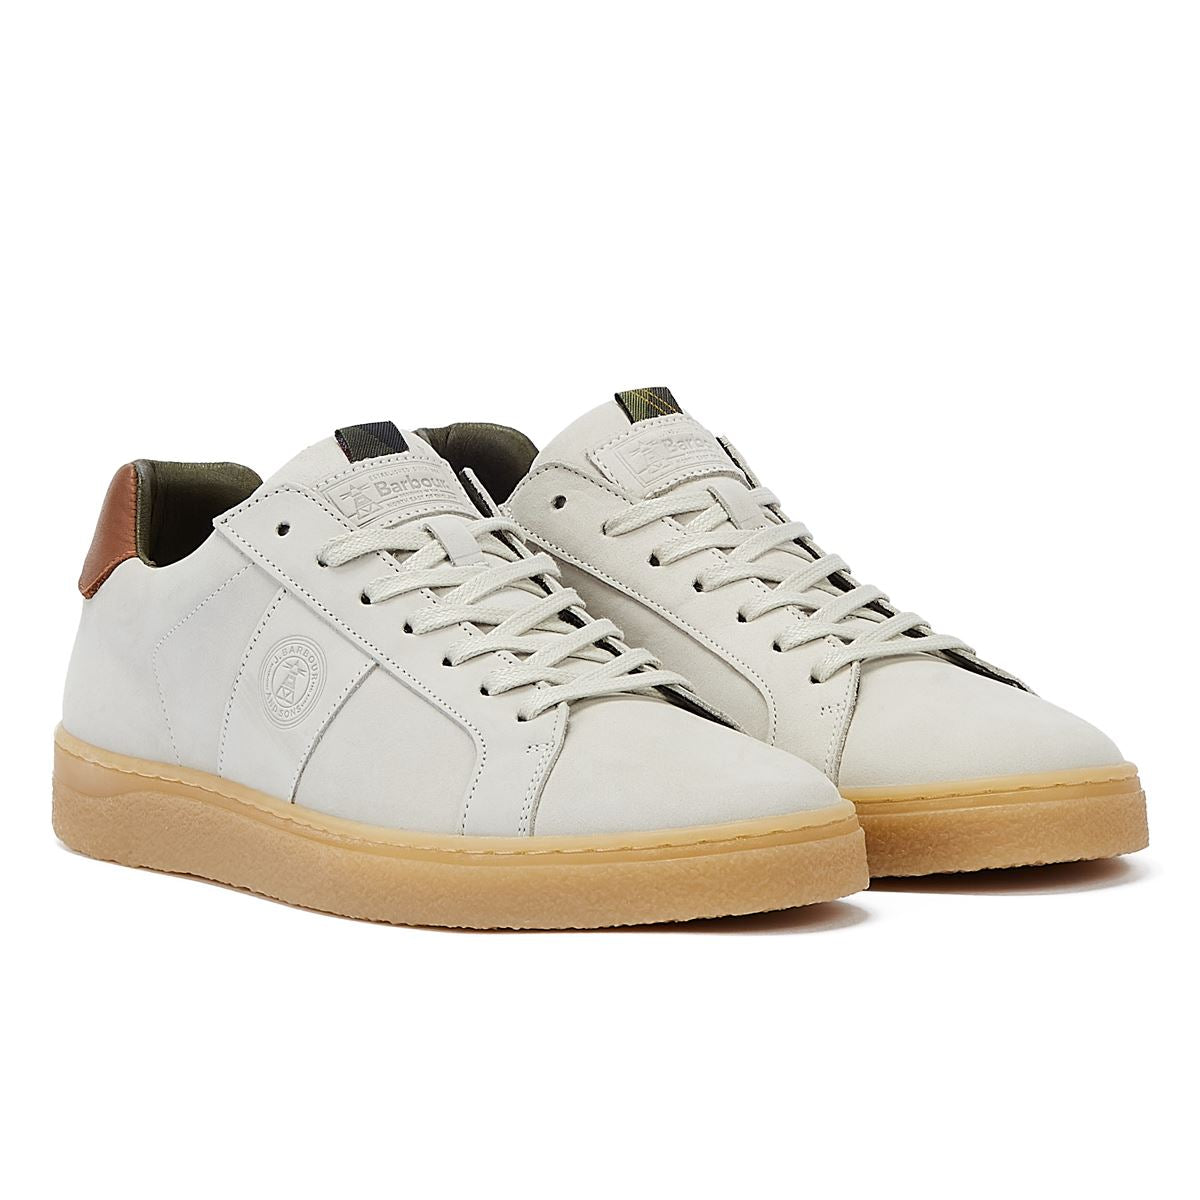 Barbour Reflect Men’s White Trainers